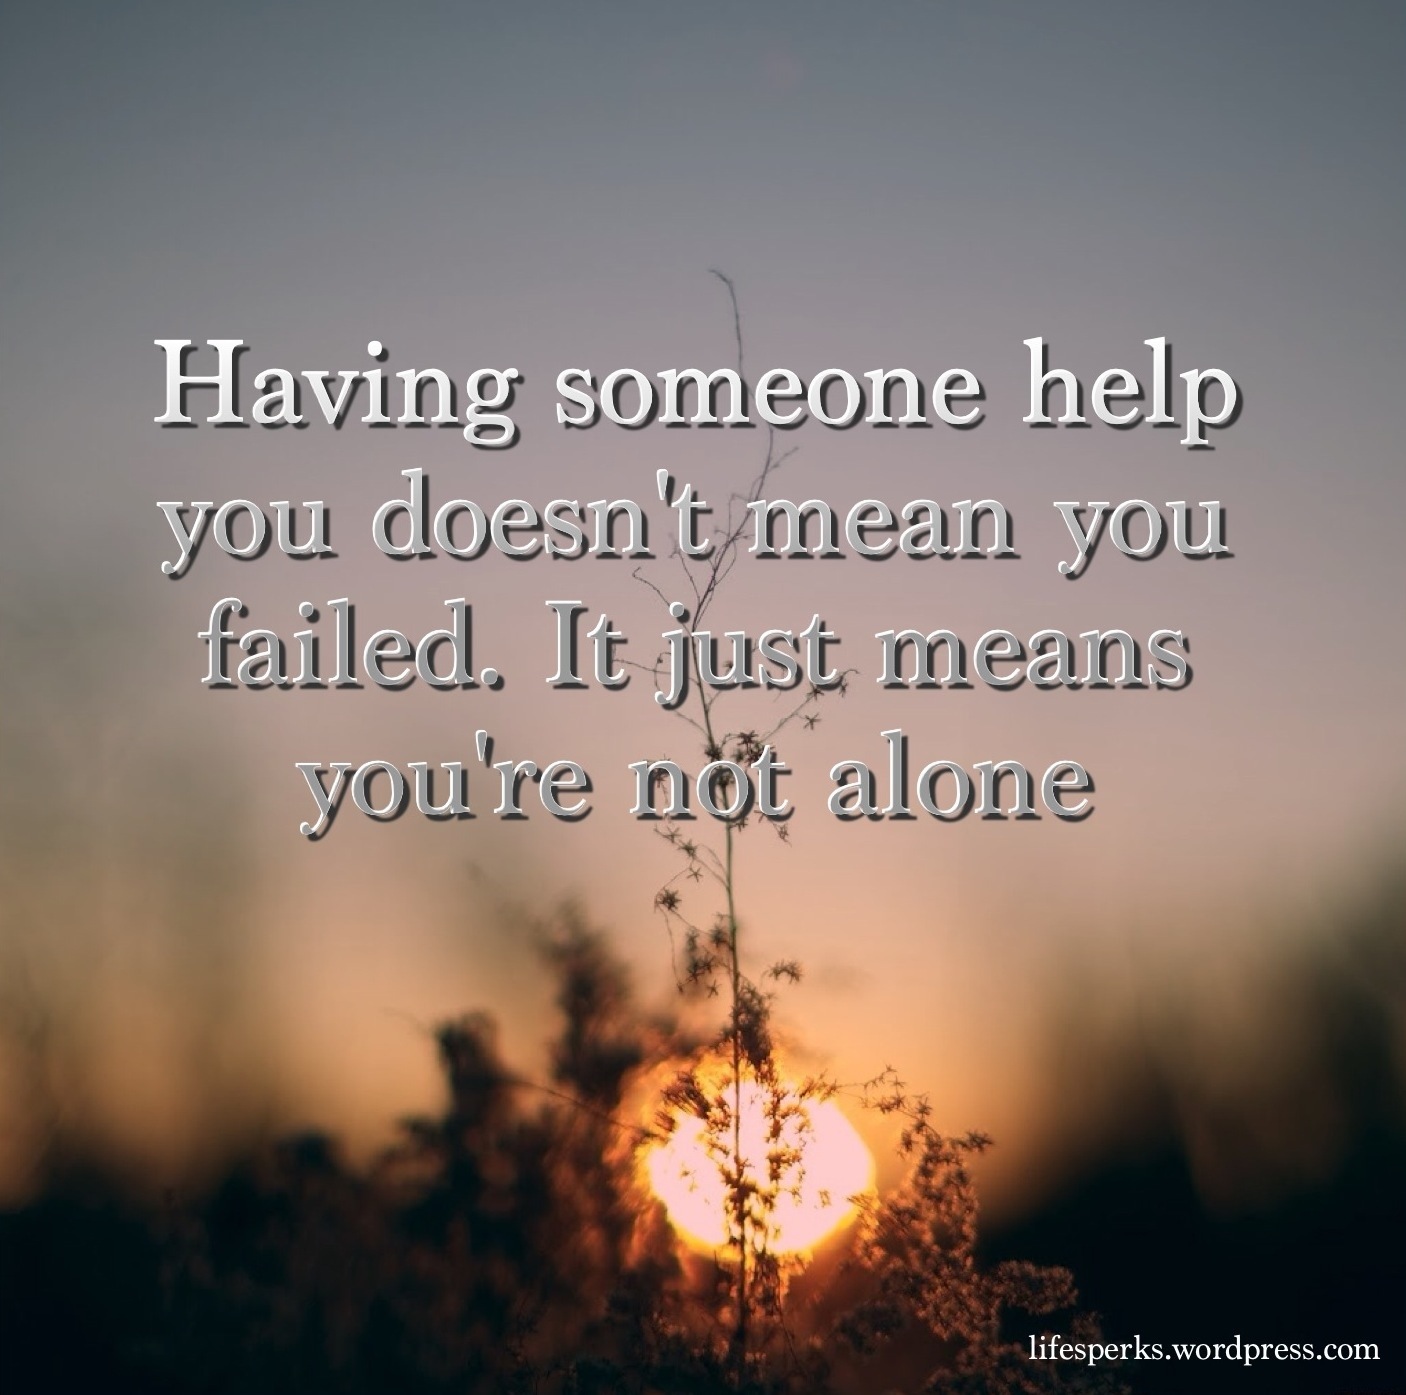 Having someone help you doesn't mean you failed. It just means you're not in it alone